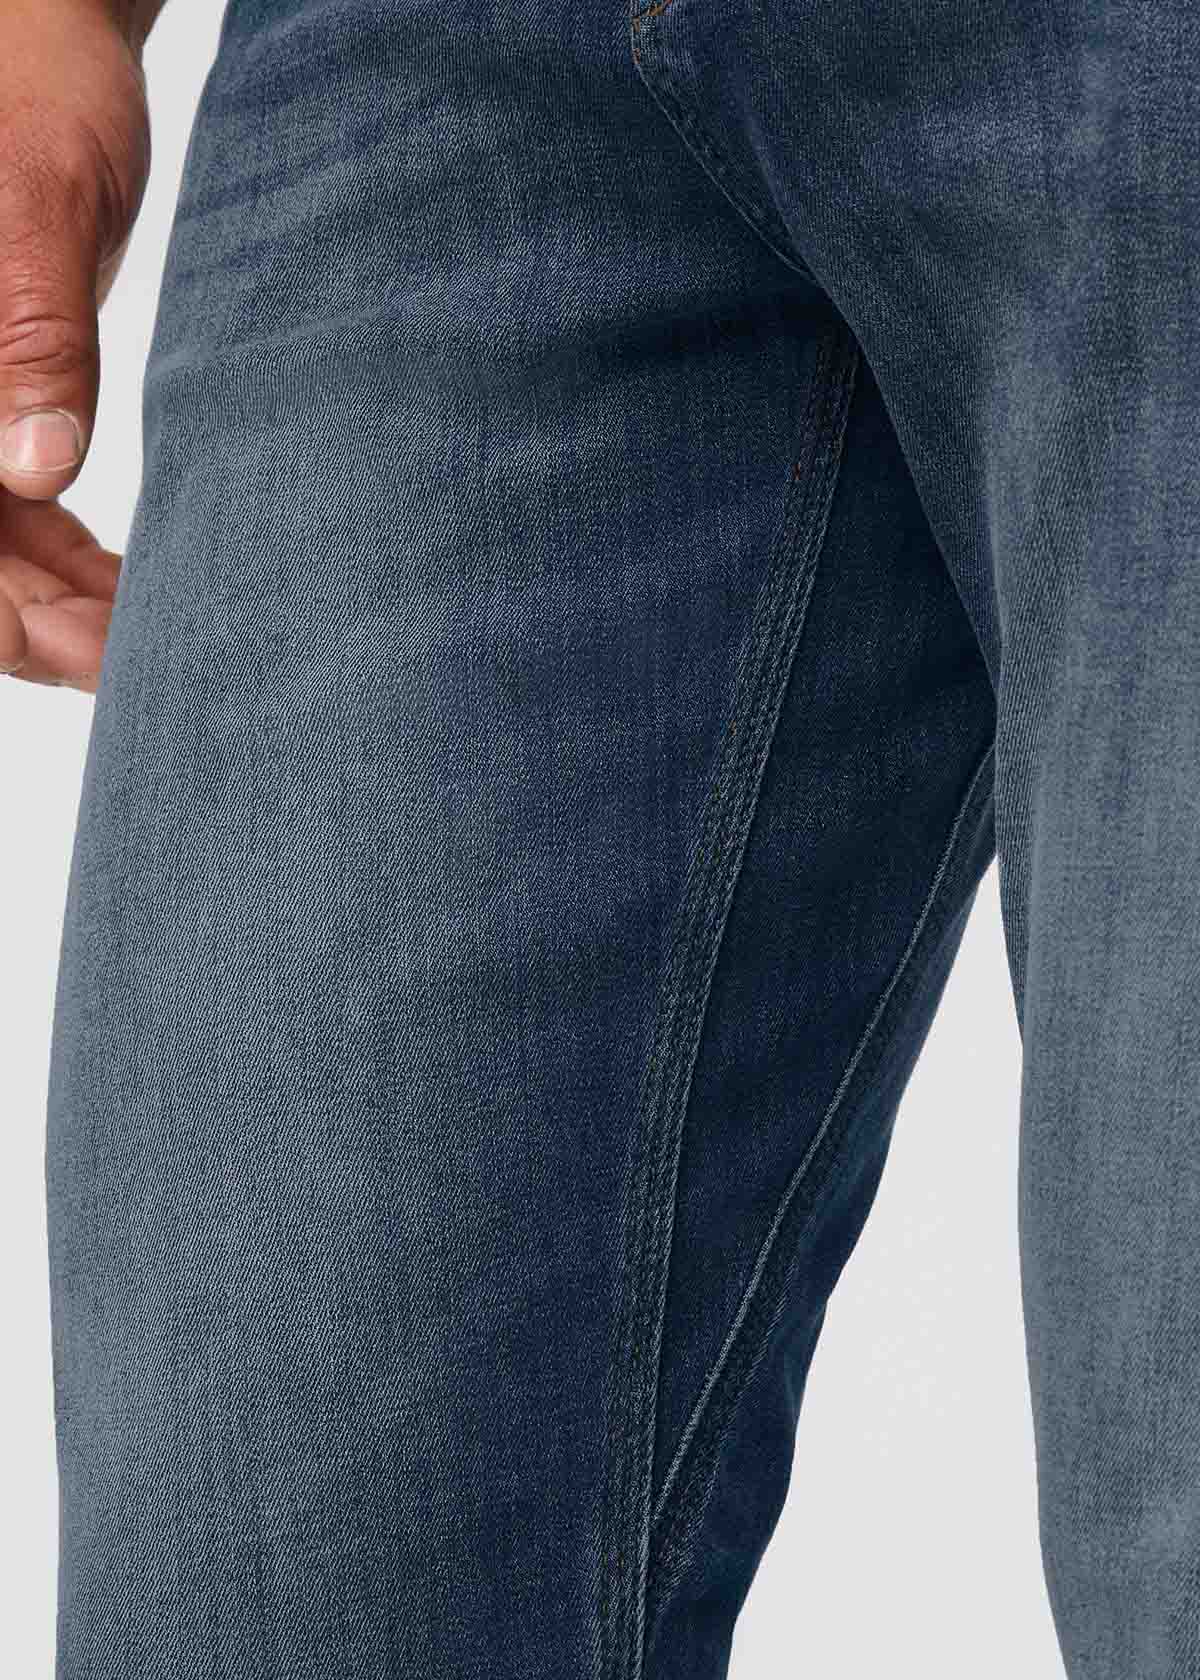 DS9C61 Shaded Blue Stretch Denim Jeans